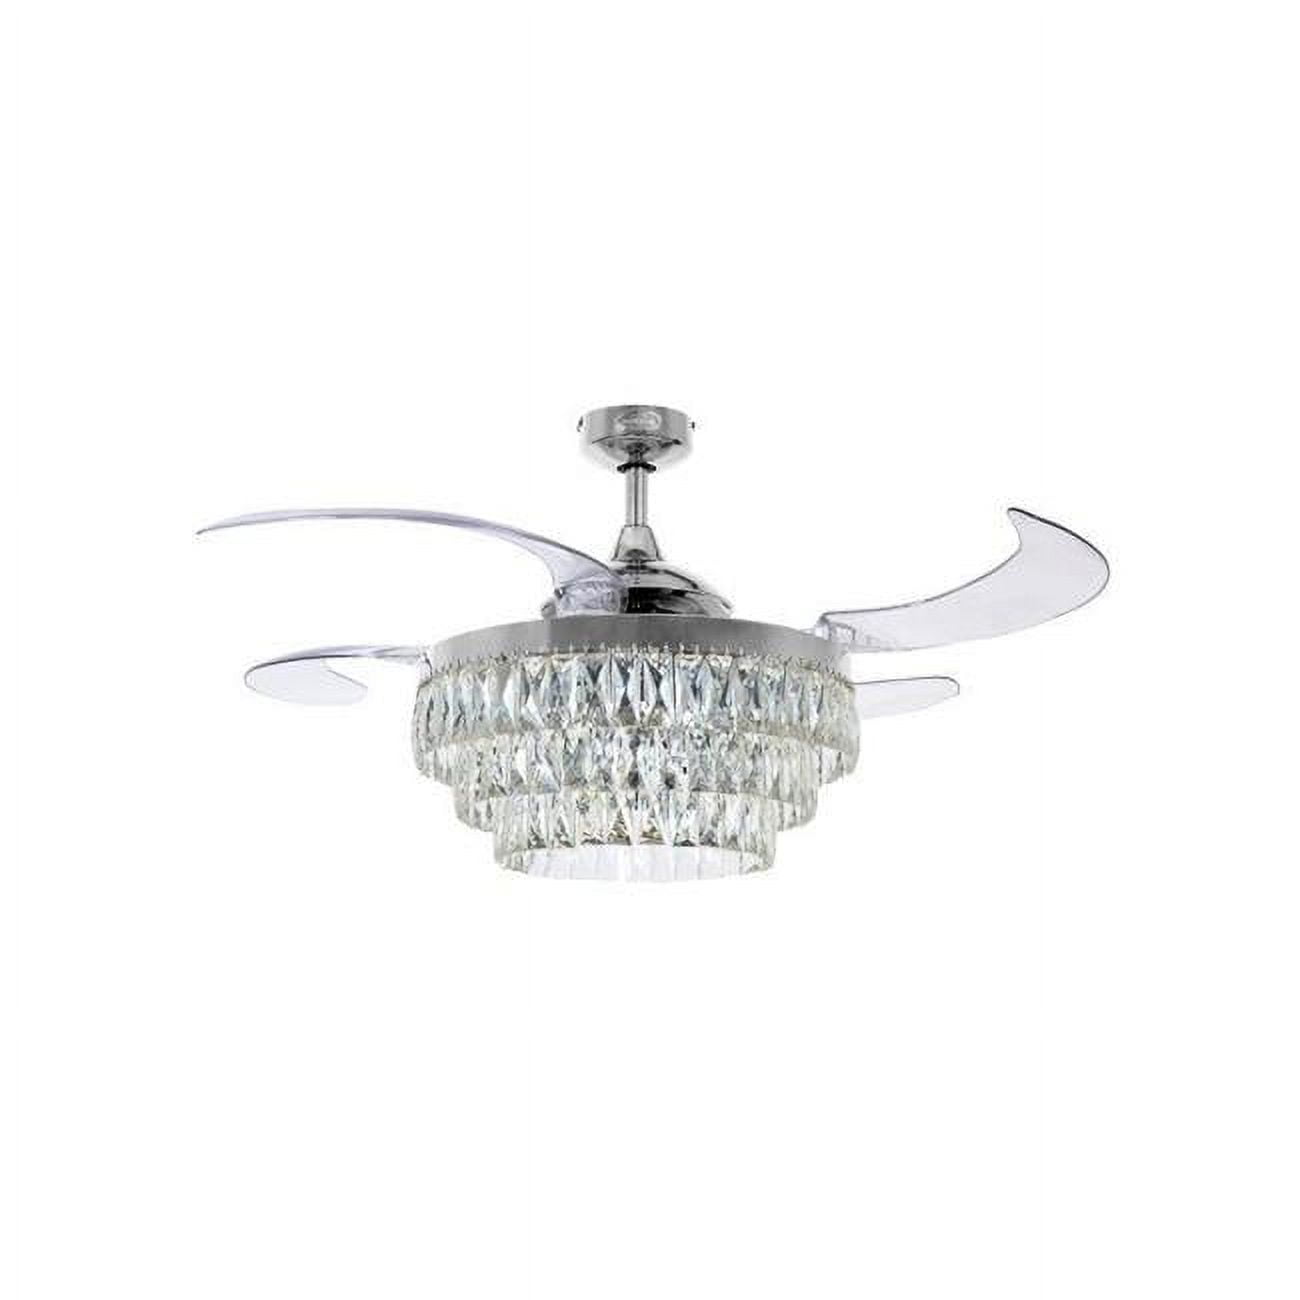 Picture of Fanaway 21292301 48 in. Veil Chrome Rectractable Blades Ceiling Fan with Light